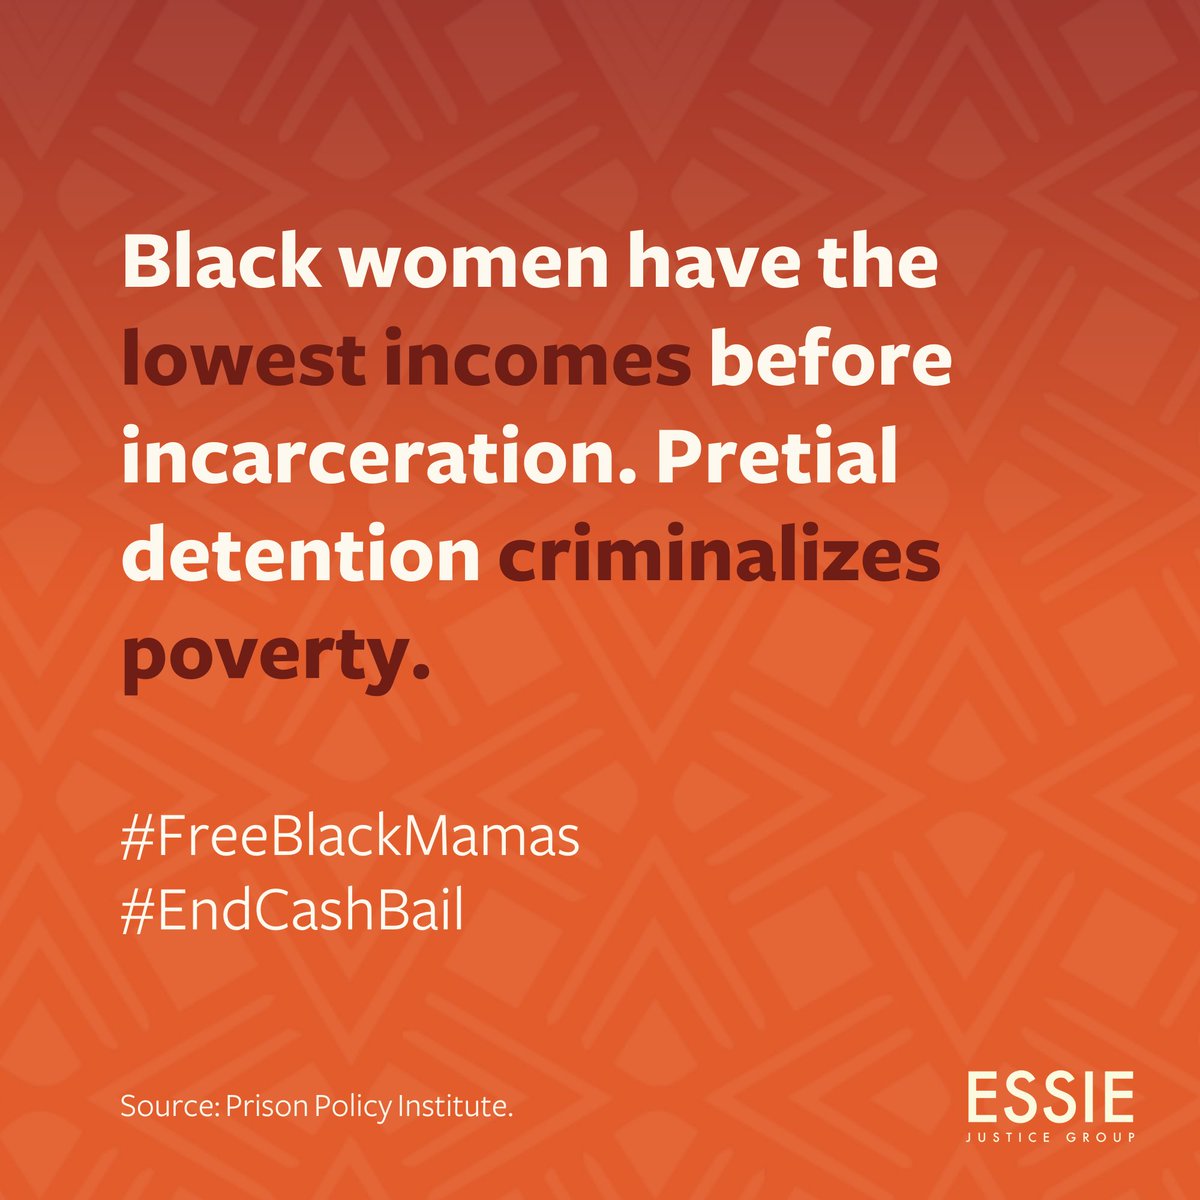 Many women incarcerated in jails have bail amounts that are equivalent to an entire year's income, which means they are stuck behind bars simply because they cannot afford bail. #EndCashBail #FreeBlackMamas